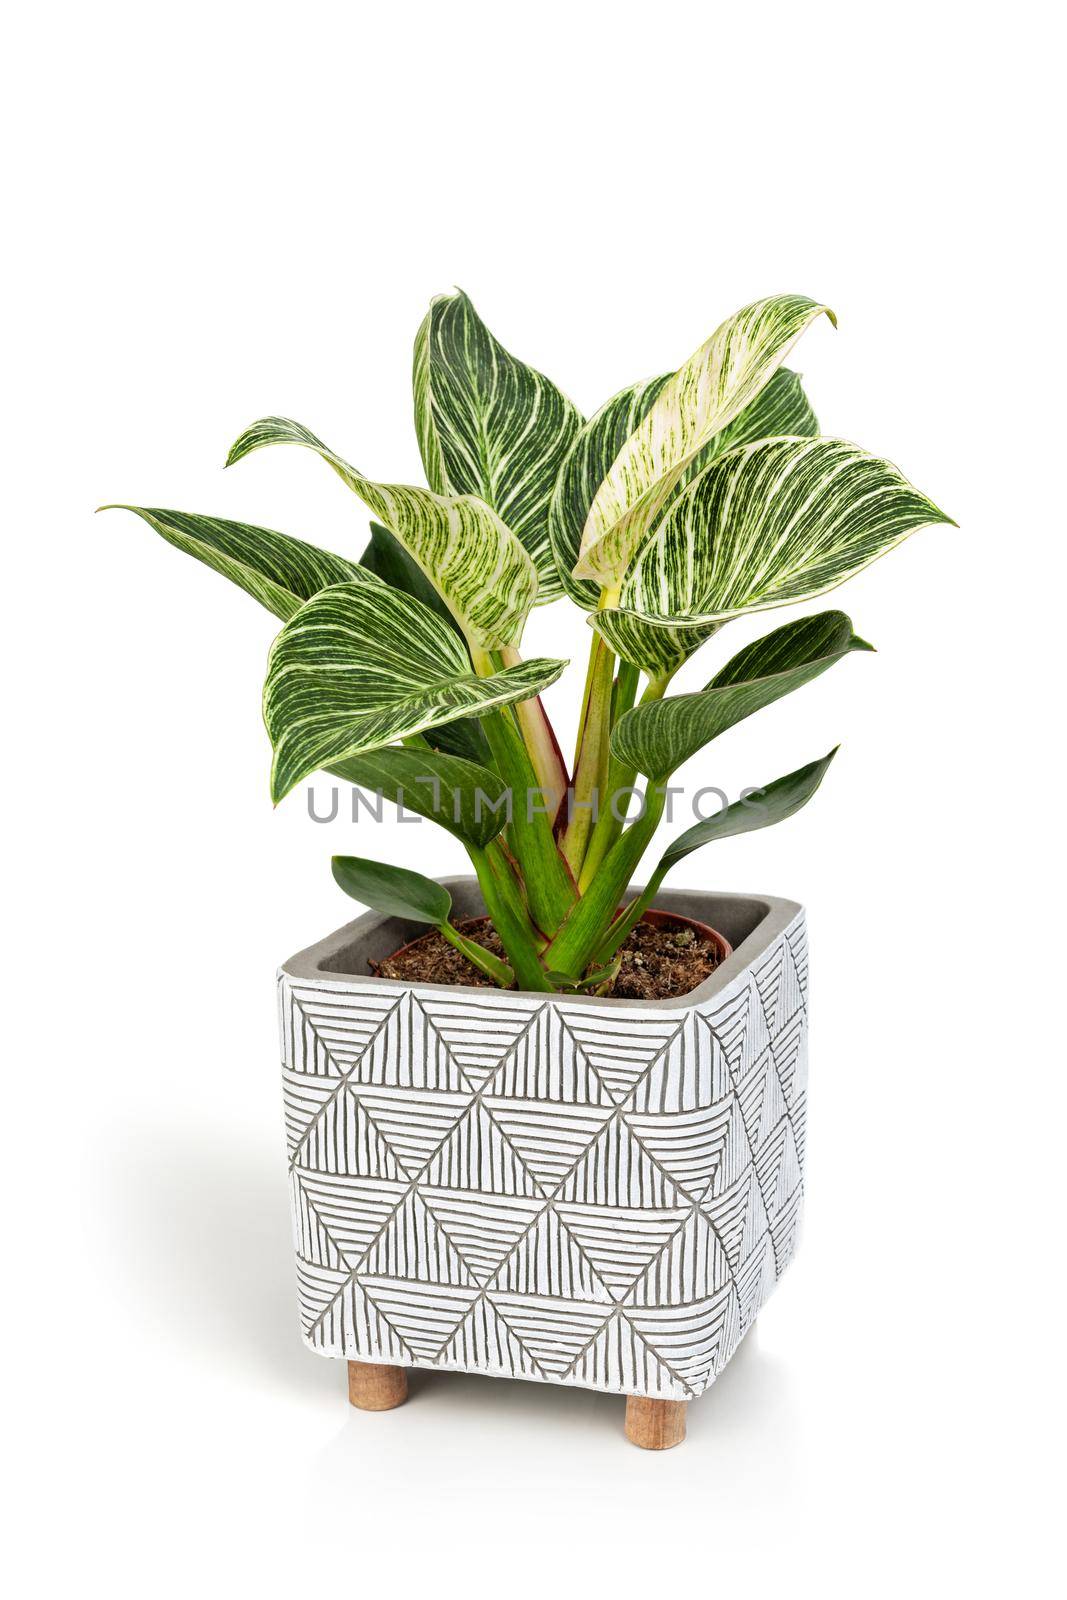 Philodendron Birkin house plant in white textured pot by igor_stramyk